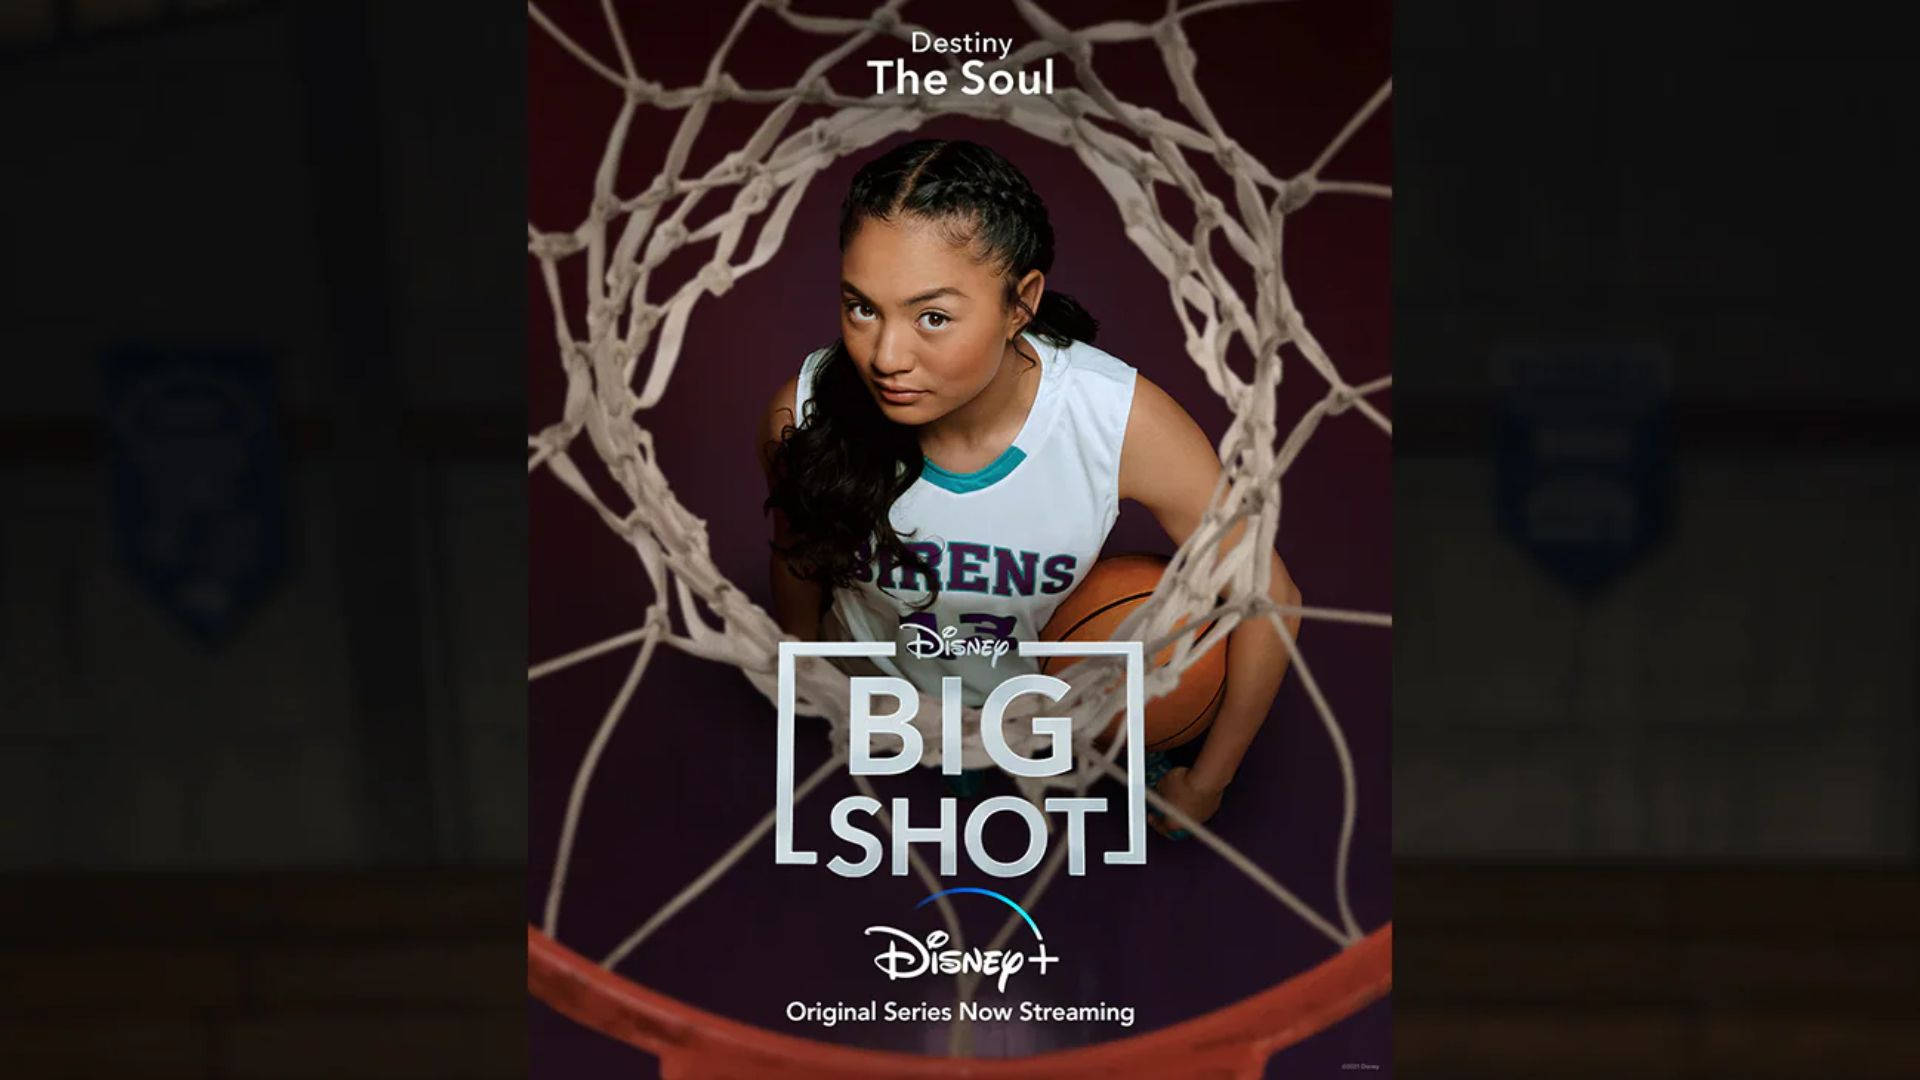 An Epitome Of Sporty Ambition - Big Shot Destiny Winters Background